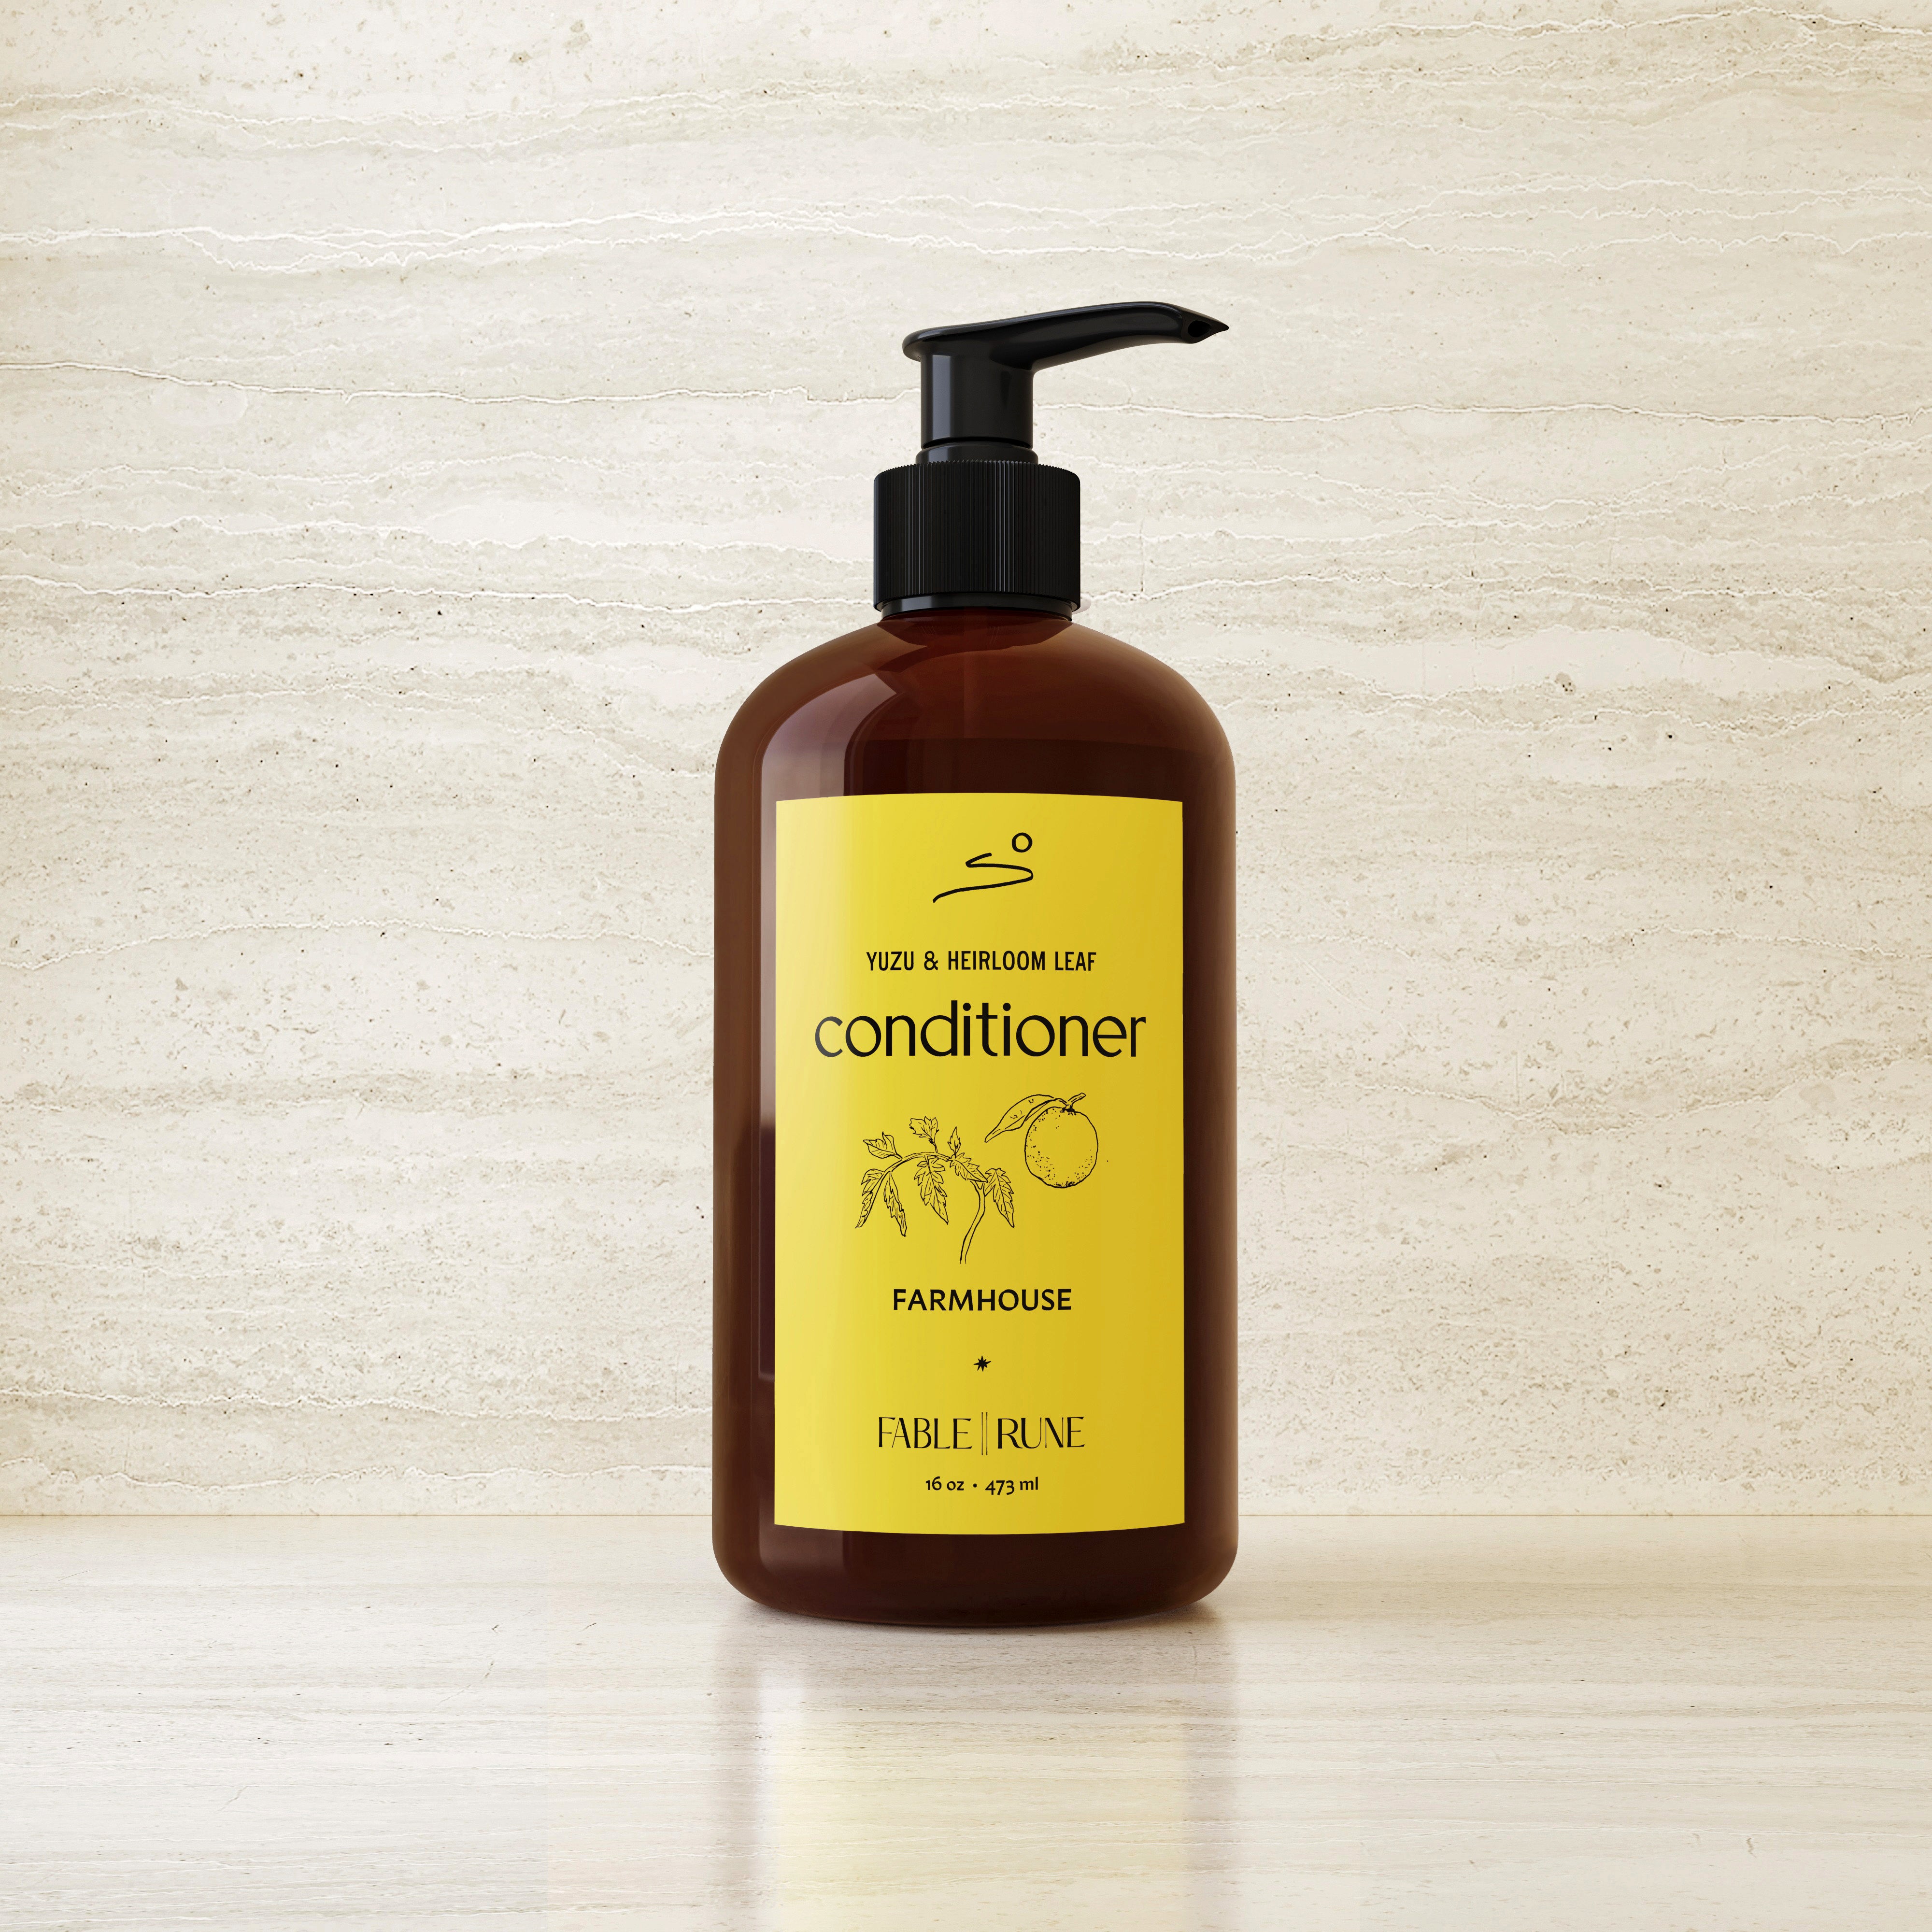 Yuzu &amp; Heirloom Leaf Conditioner Handcrafted Fable Rune for Farmhouse Paso Robles by Nomada Deco